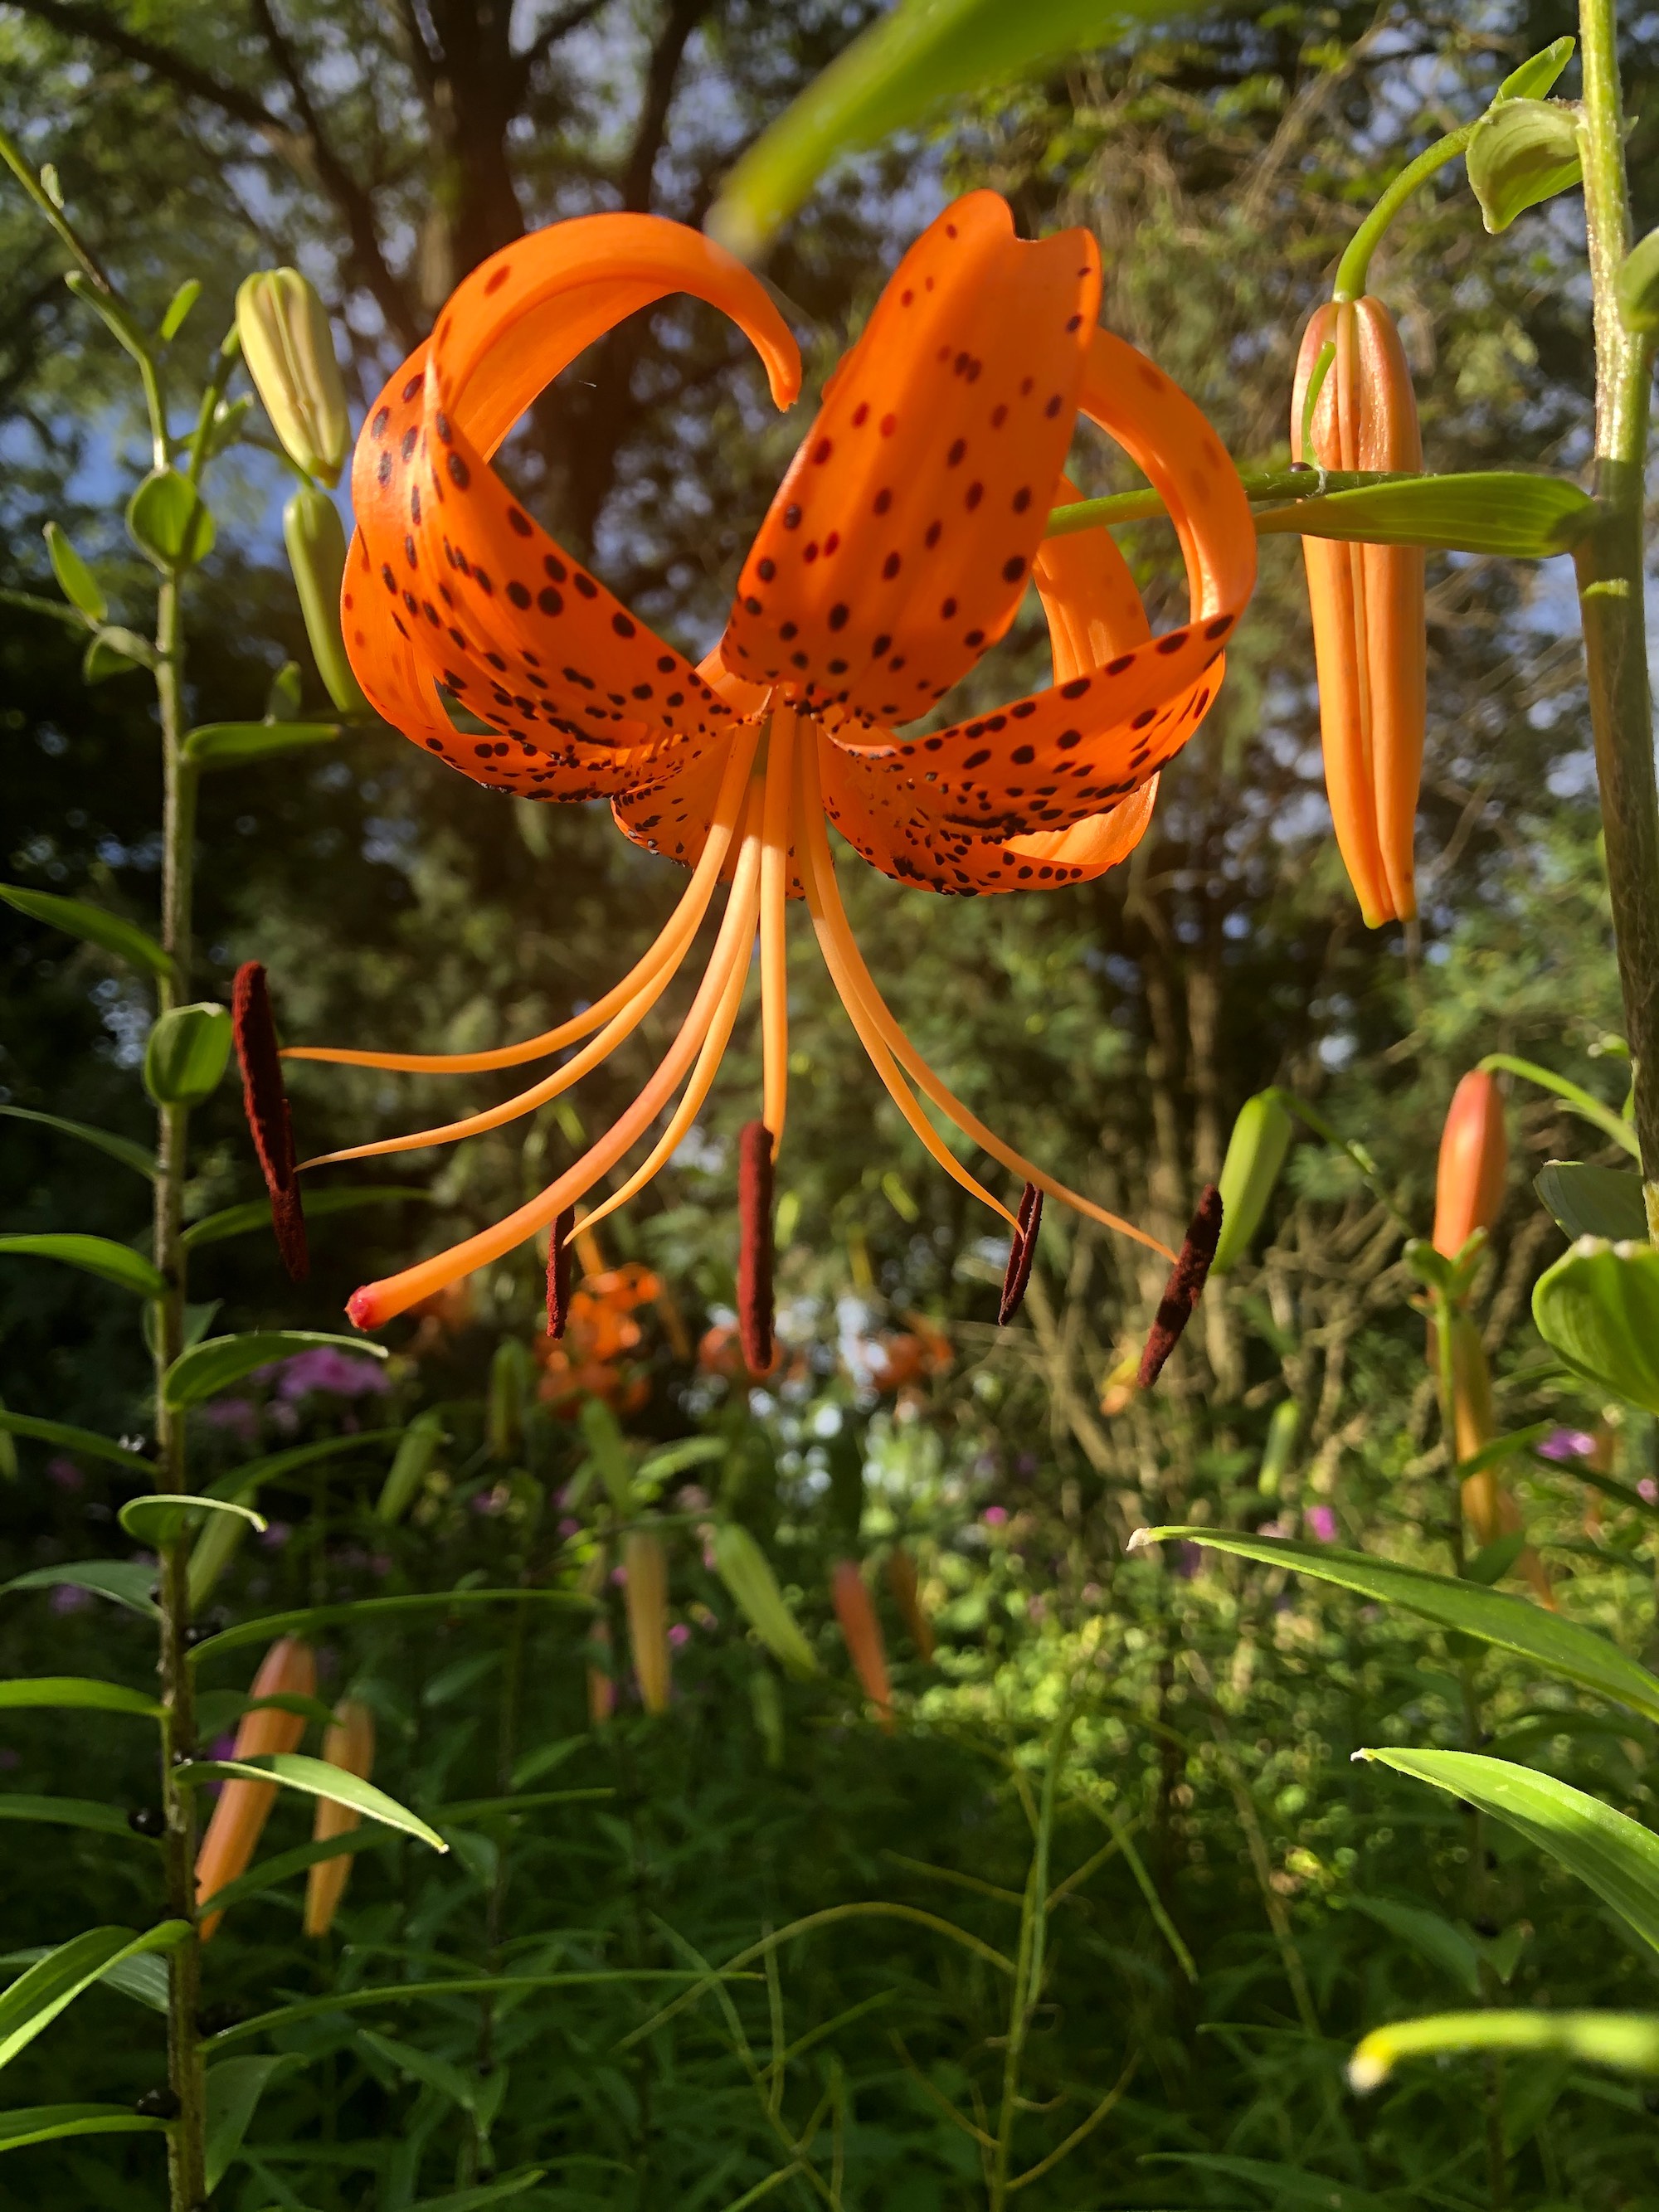 Tiger Lily near the Duck Pond on July 21, 2020.